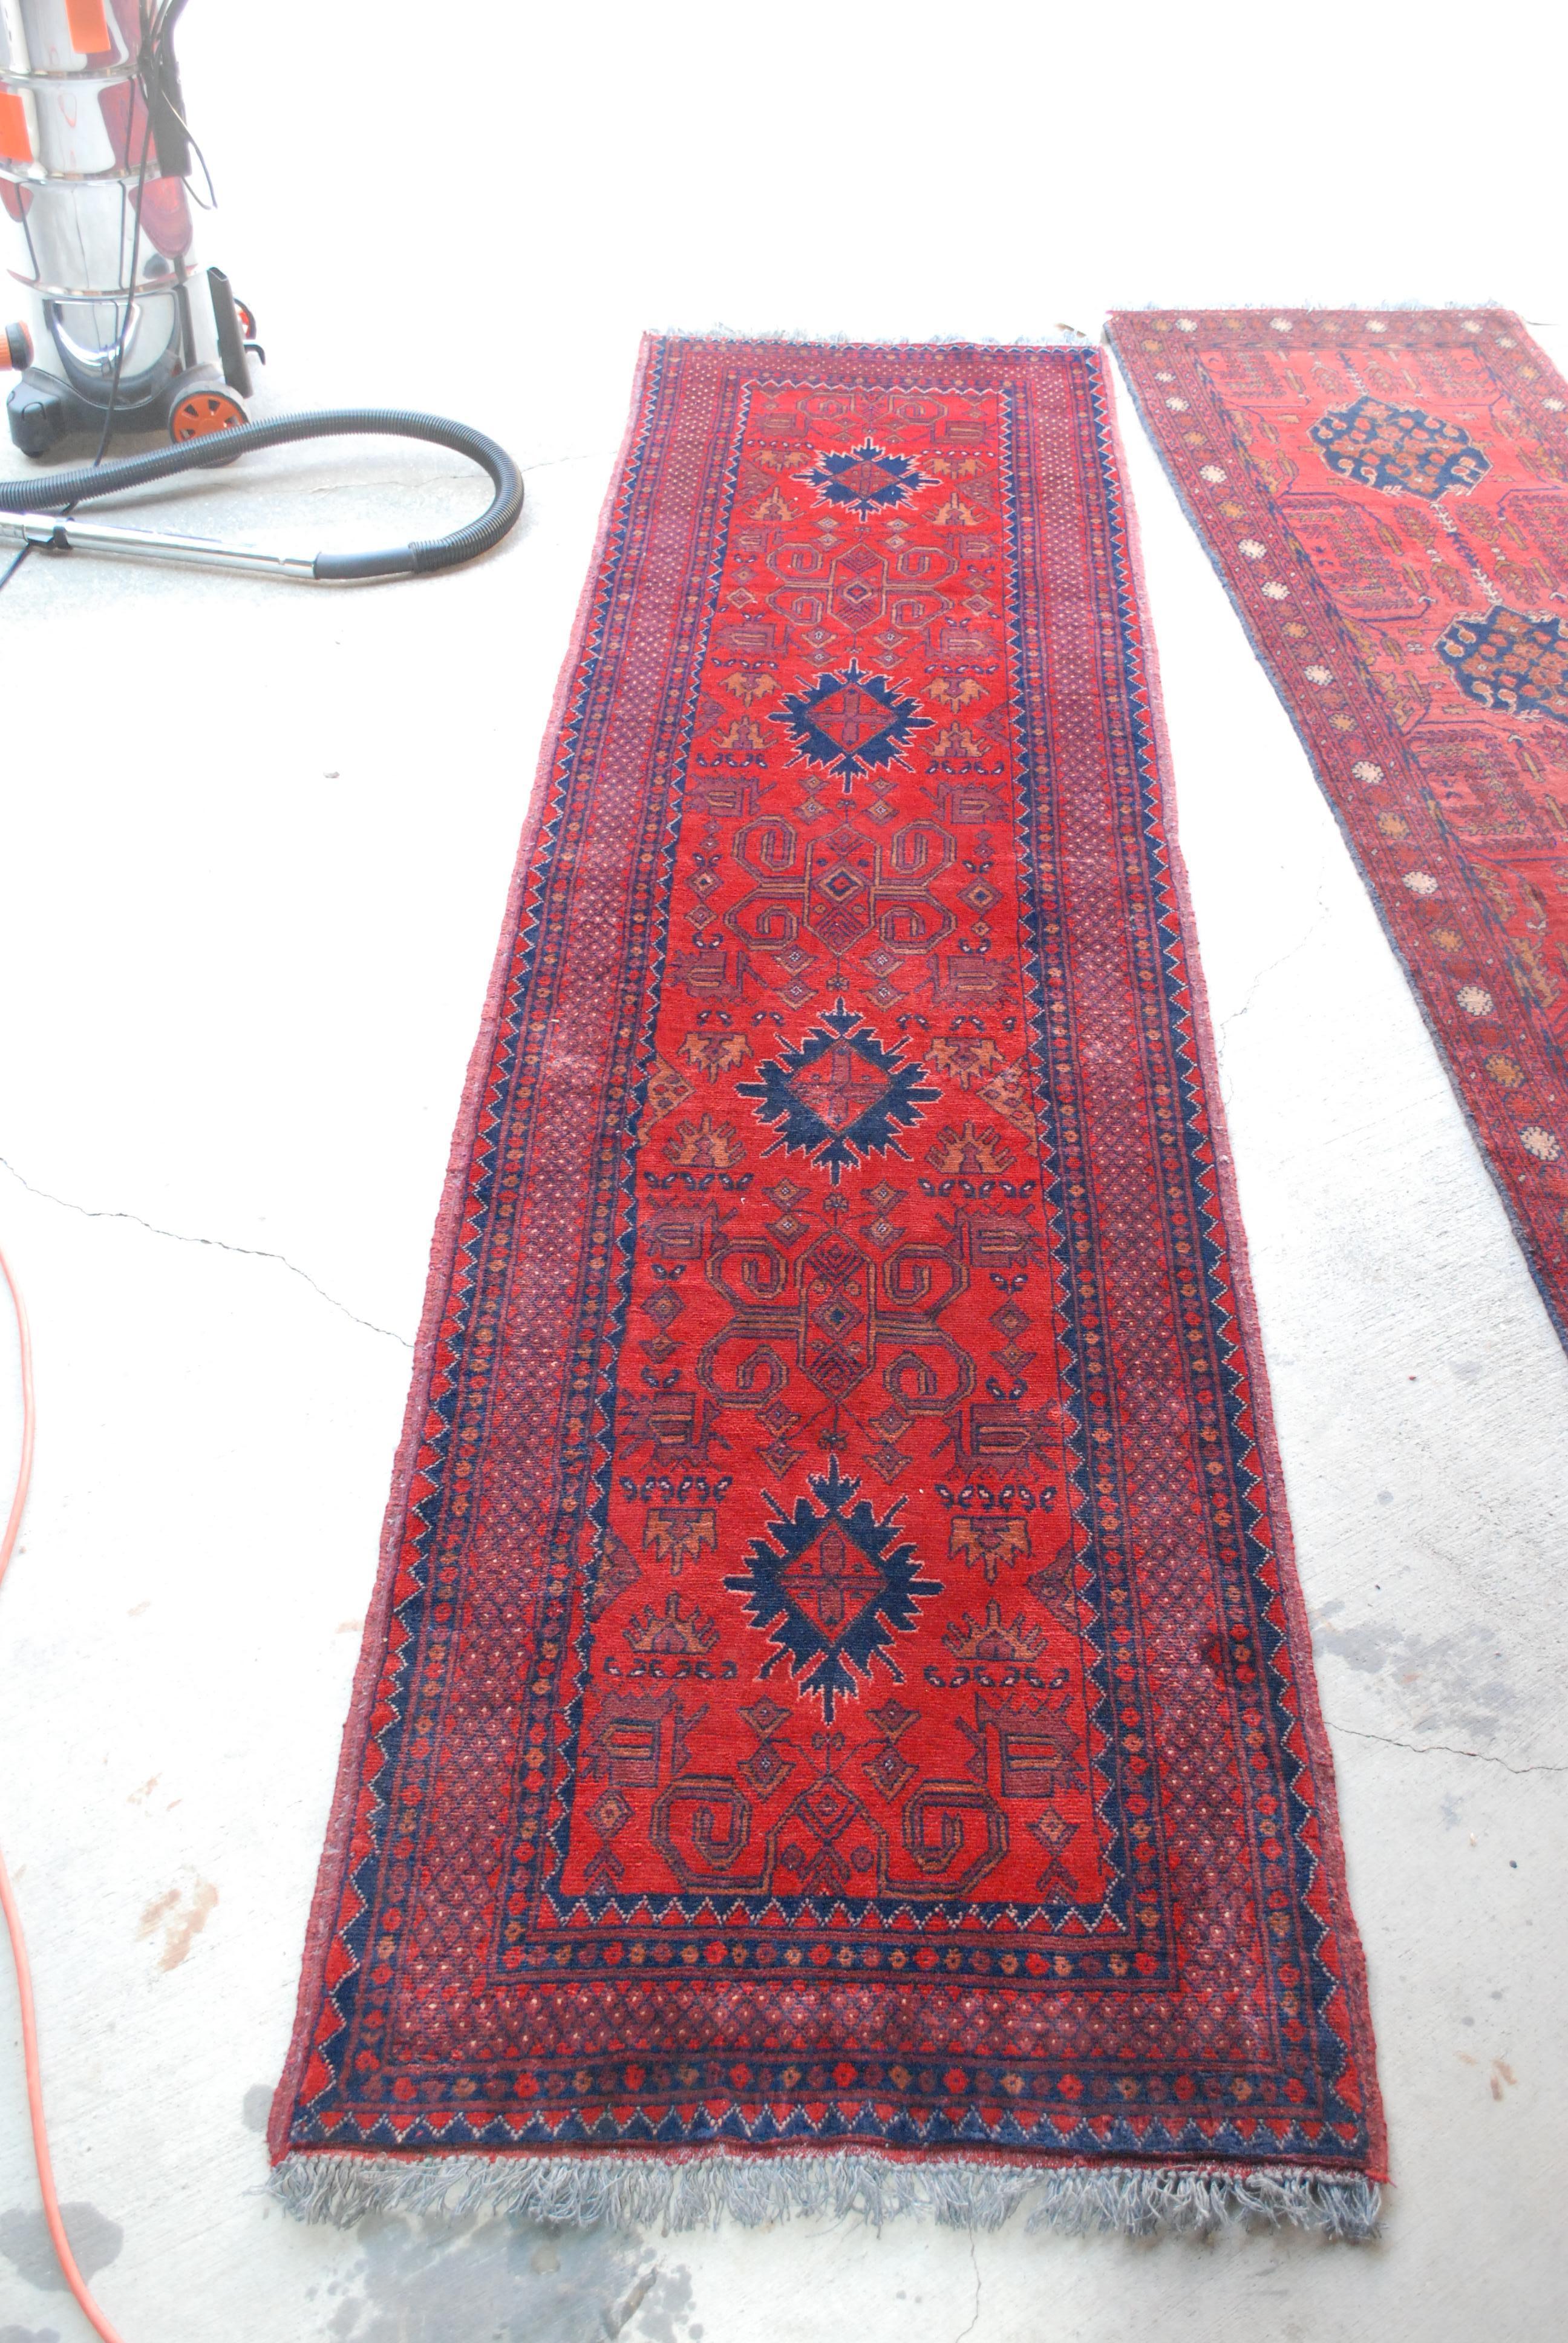 A Bohemian low-pile wool runner in rust, reds and blue accents. hand knotted wool. Symmetrical design, great vintage condition.